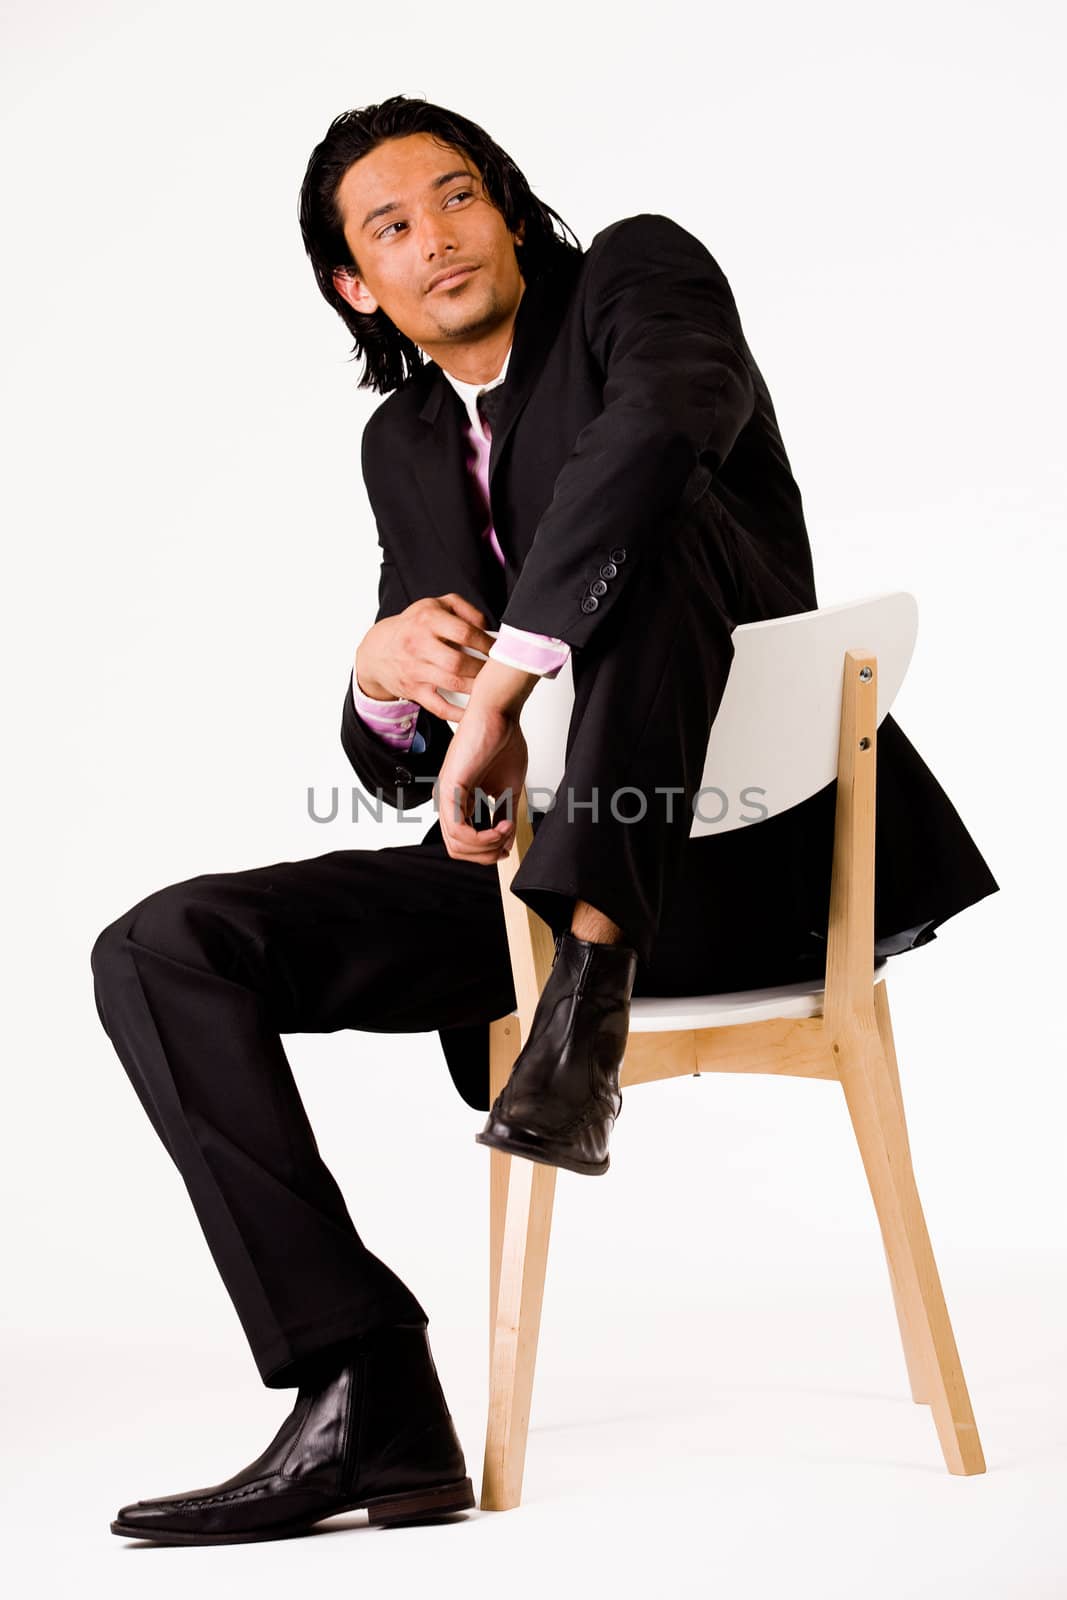 Young indonesian man in a business suit